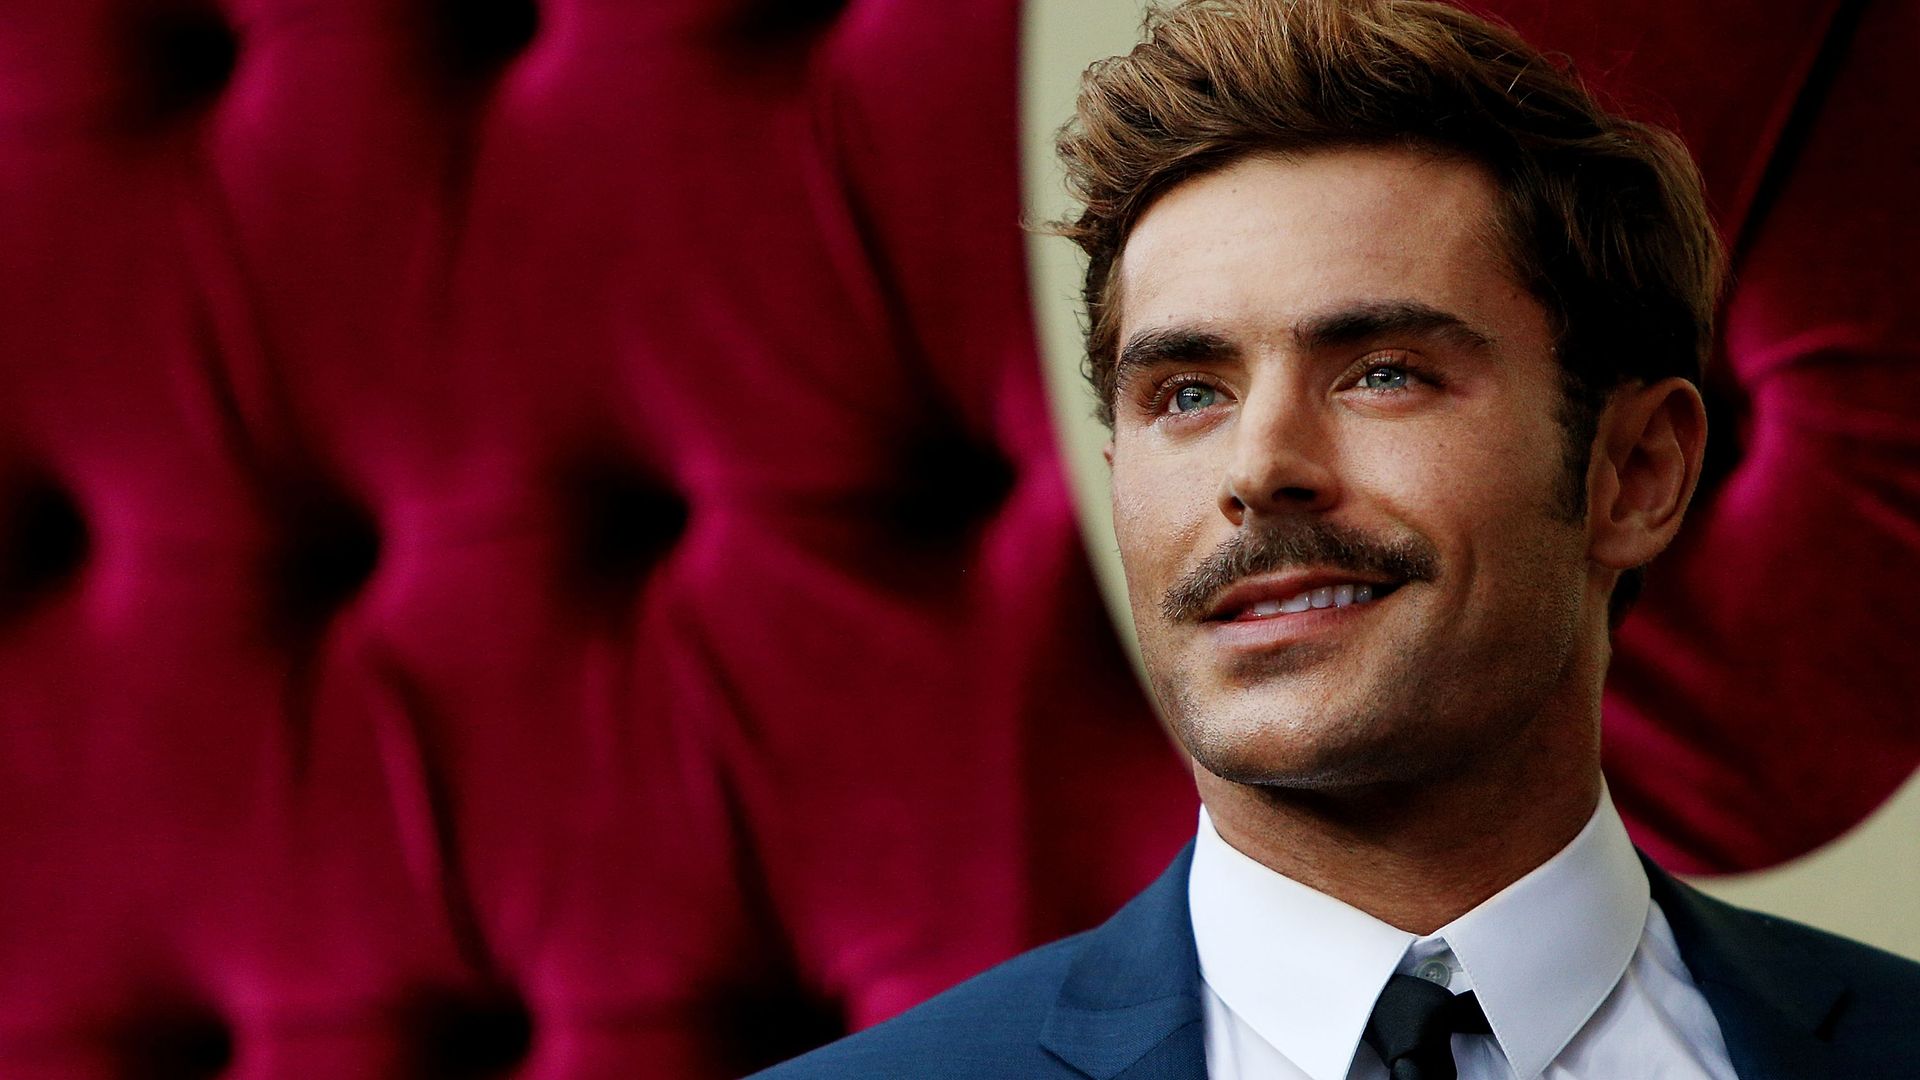 Zac Efron attends the Australian premiere of The Greatest Showman at The Star on December 20, 2017 in Sydney, Australia.